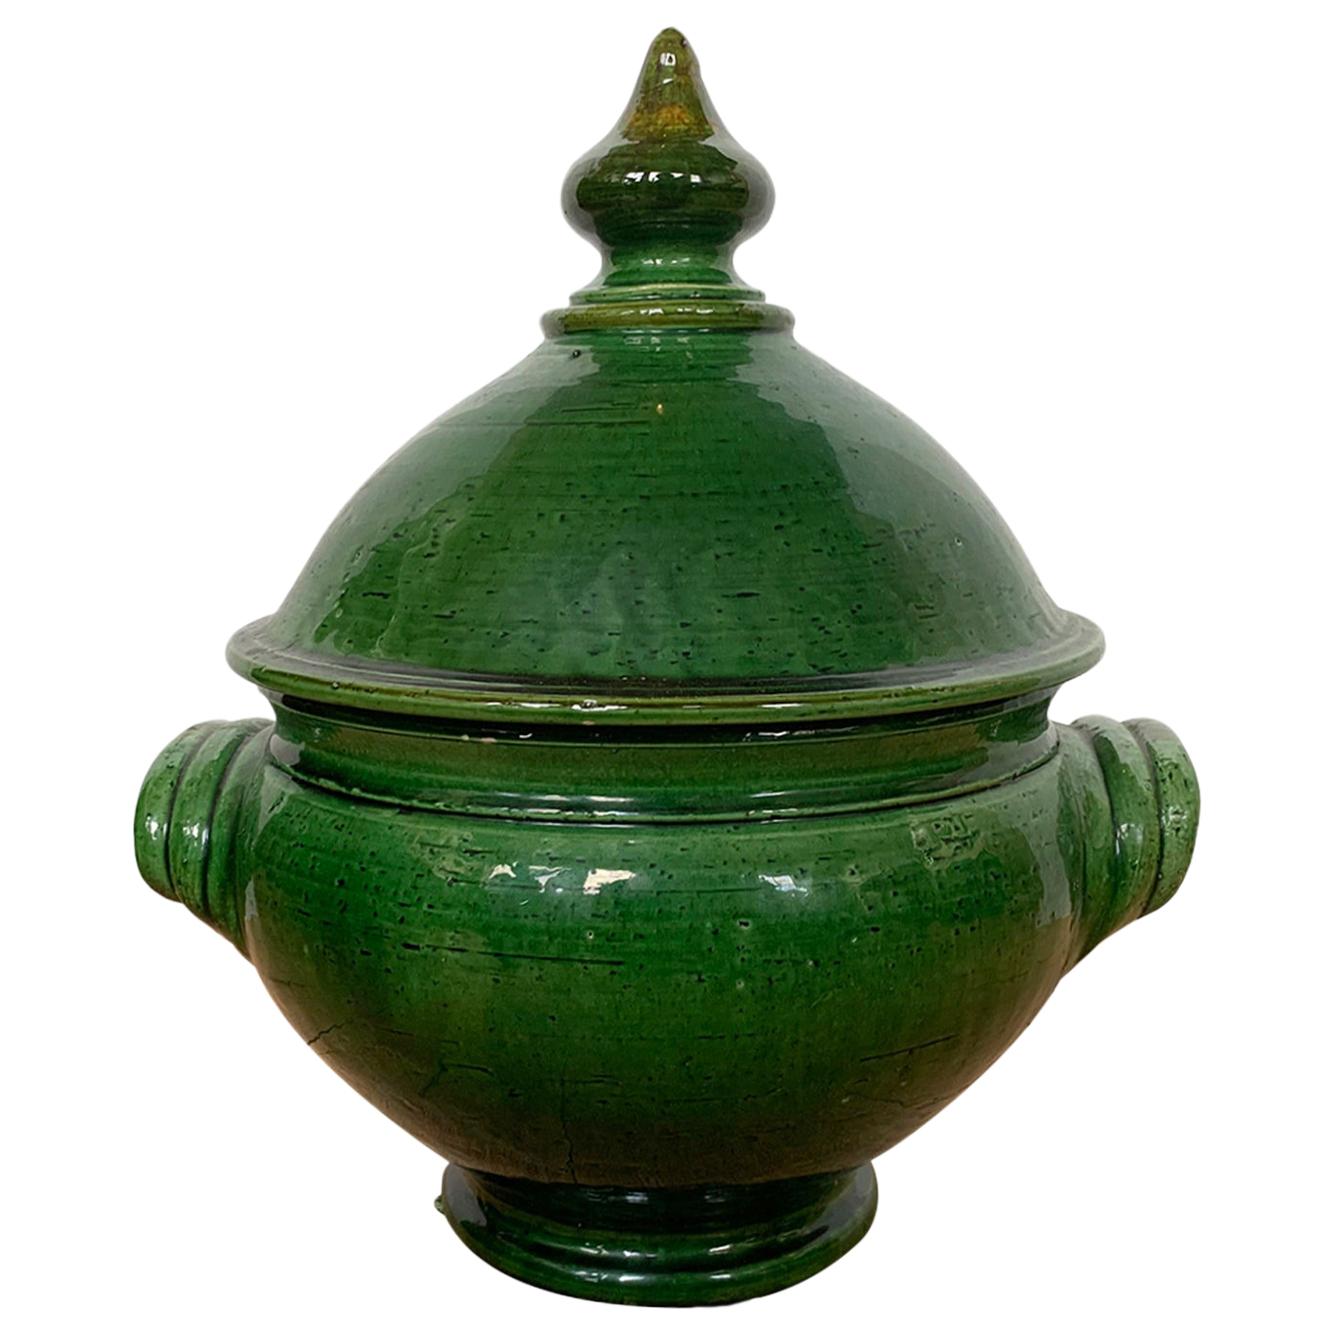 19th-20th Century French Green Glazed Earthenware Lidded Tureen